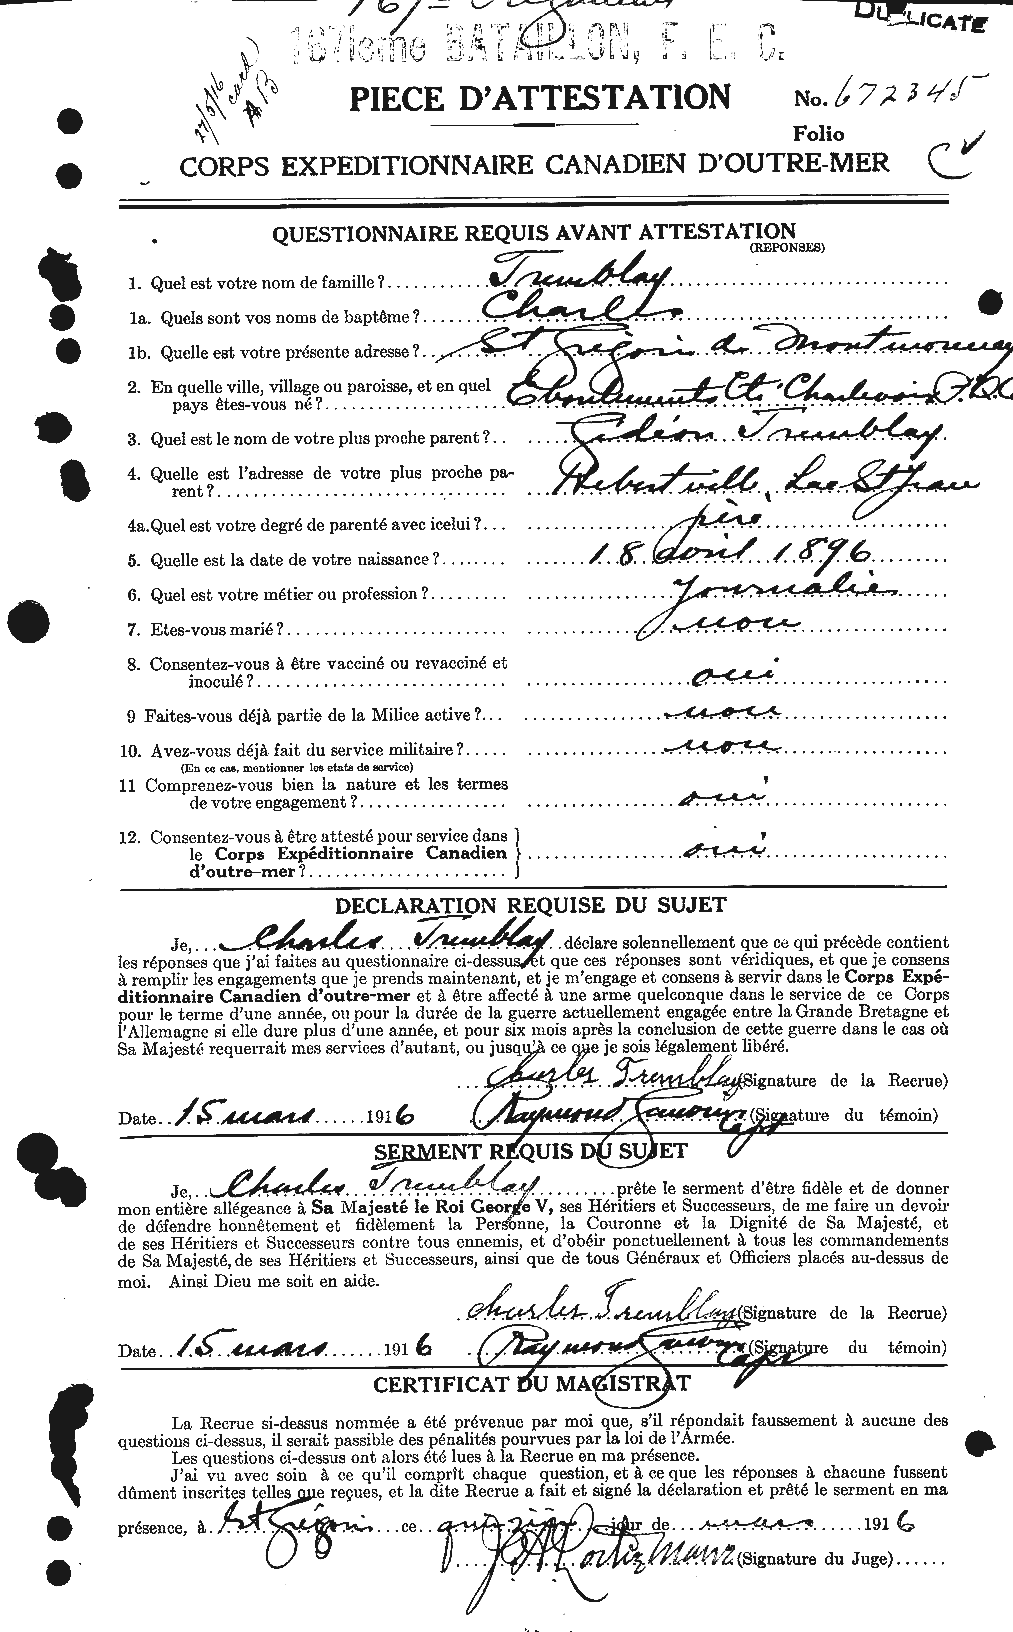 Personnel Records of the First World War - CEF 638982a